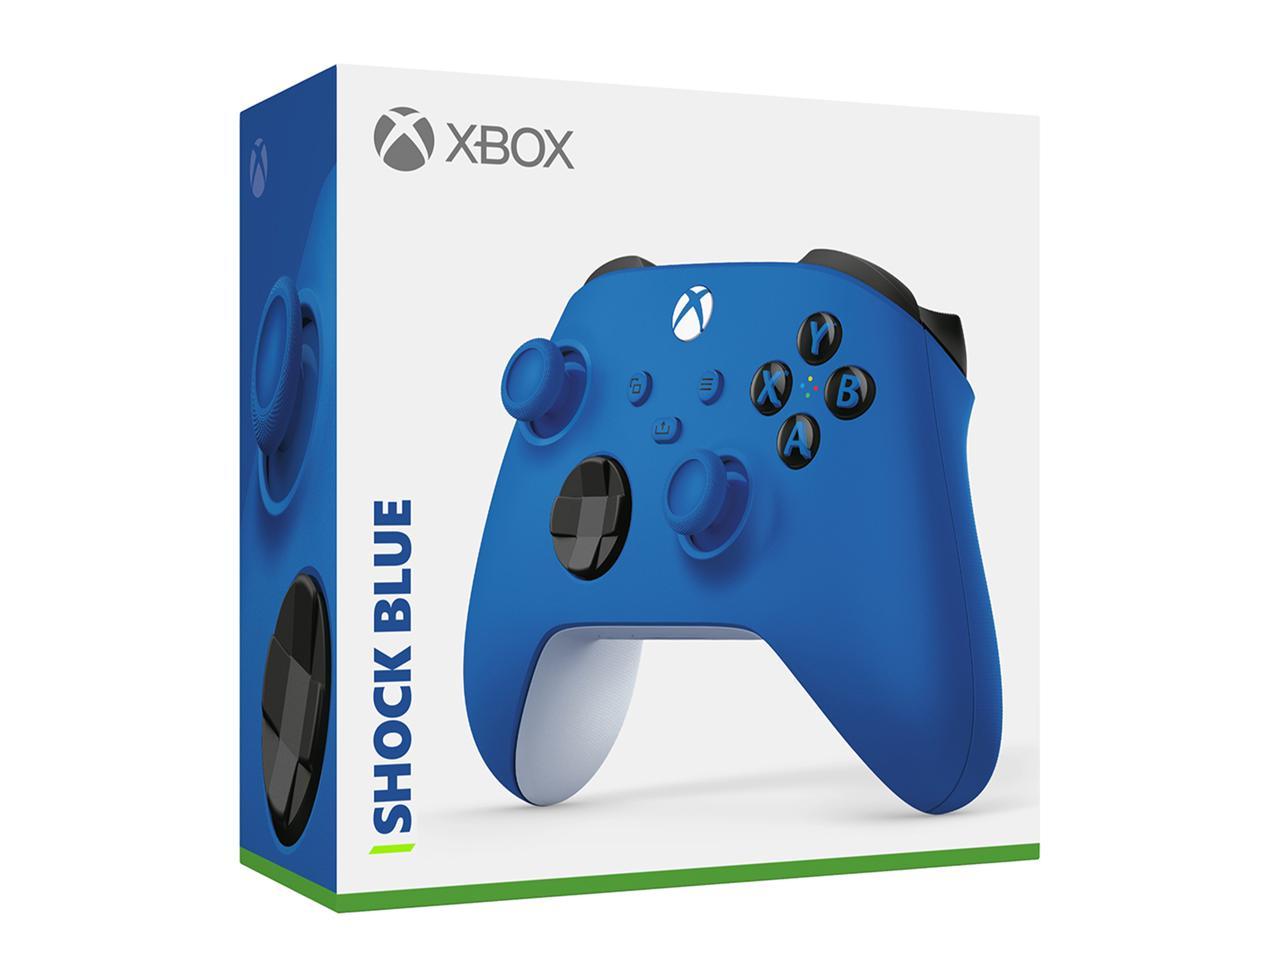 Xbox Wireless Controller - Shock Blue - image 5 of 6